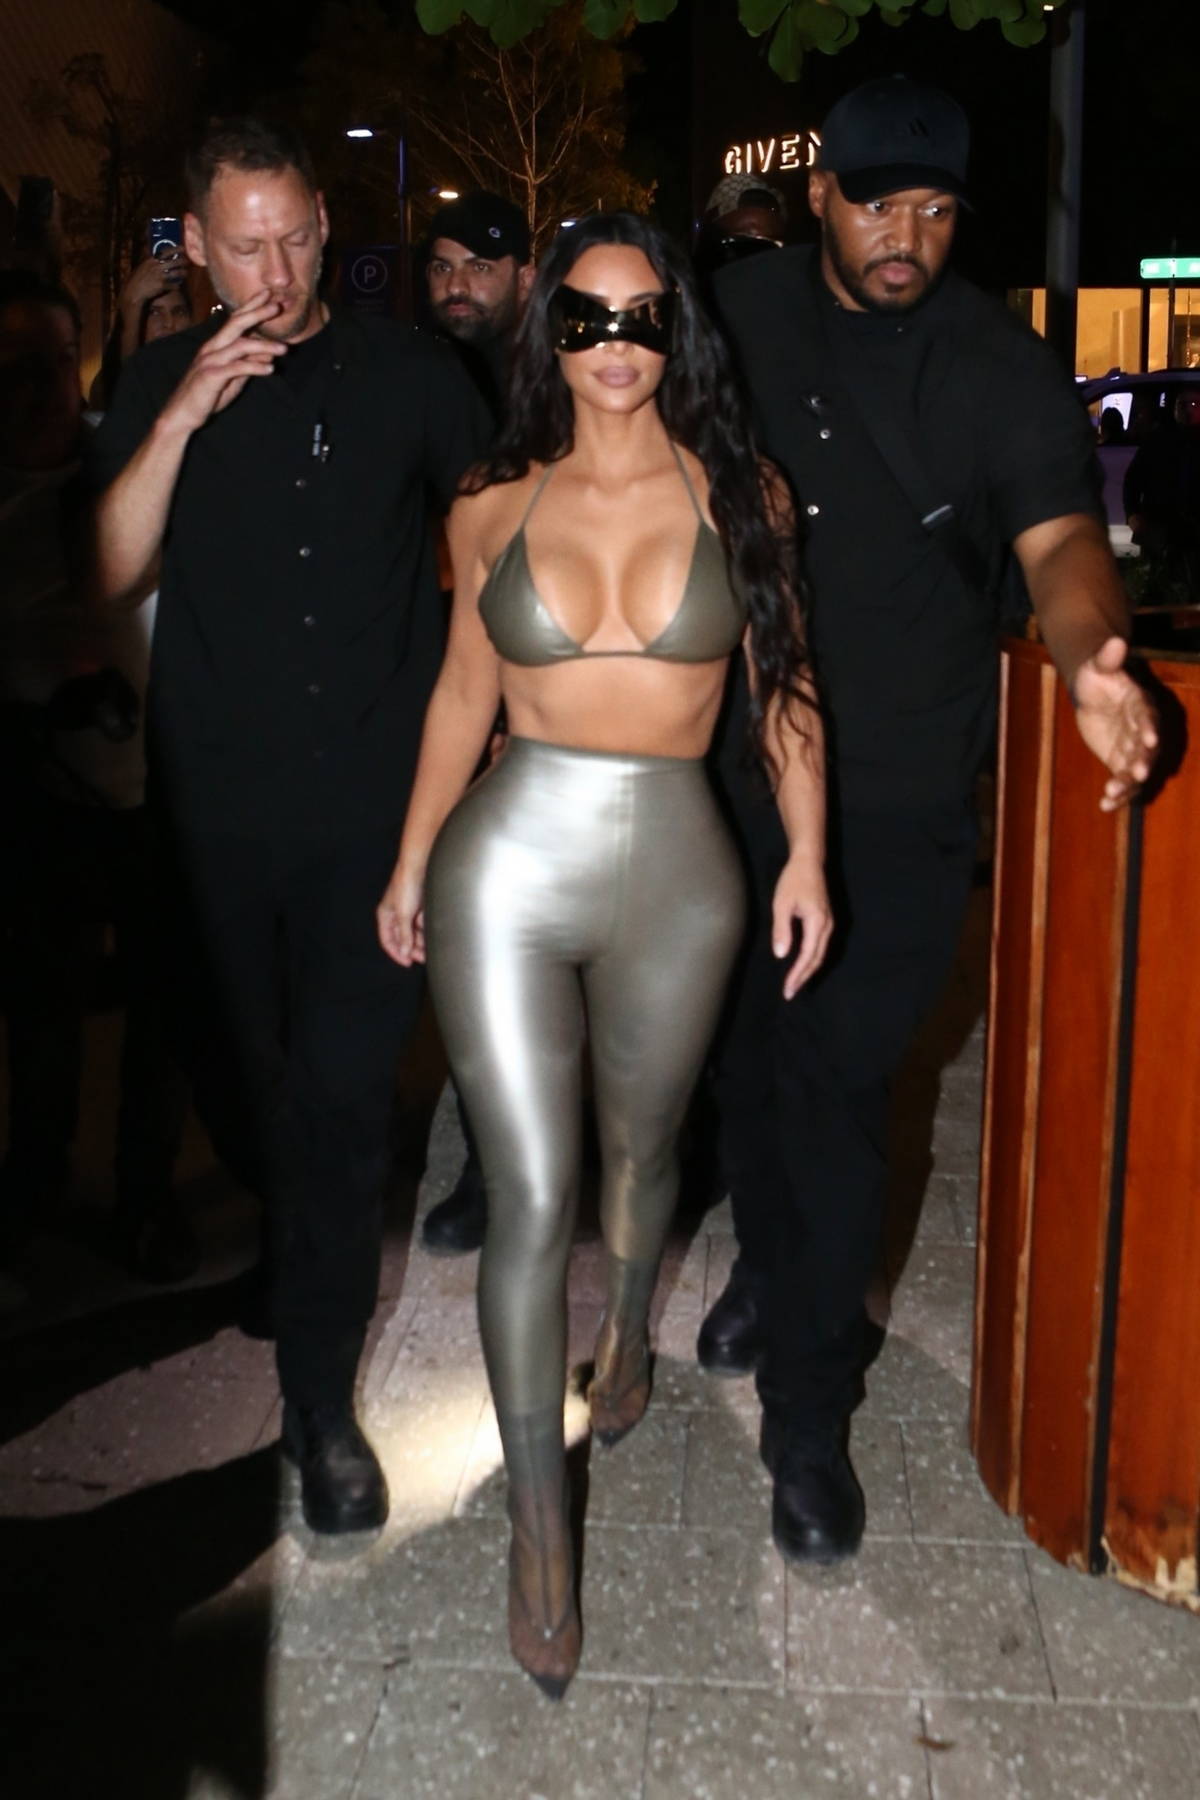 https://www.celebsfirst.com/wp-content/uploads/2022/03/kim-kardashian-shows-off-her-famous-curves-while-arriving-at-the-skims-pop-up-shop-with-khloe-kardashian-in-miami-florida-190322_8.jpg